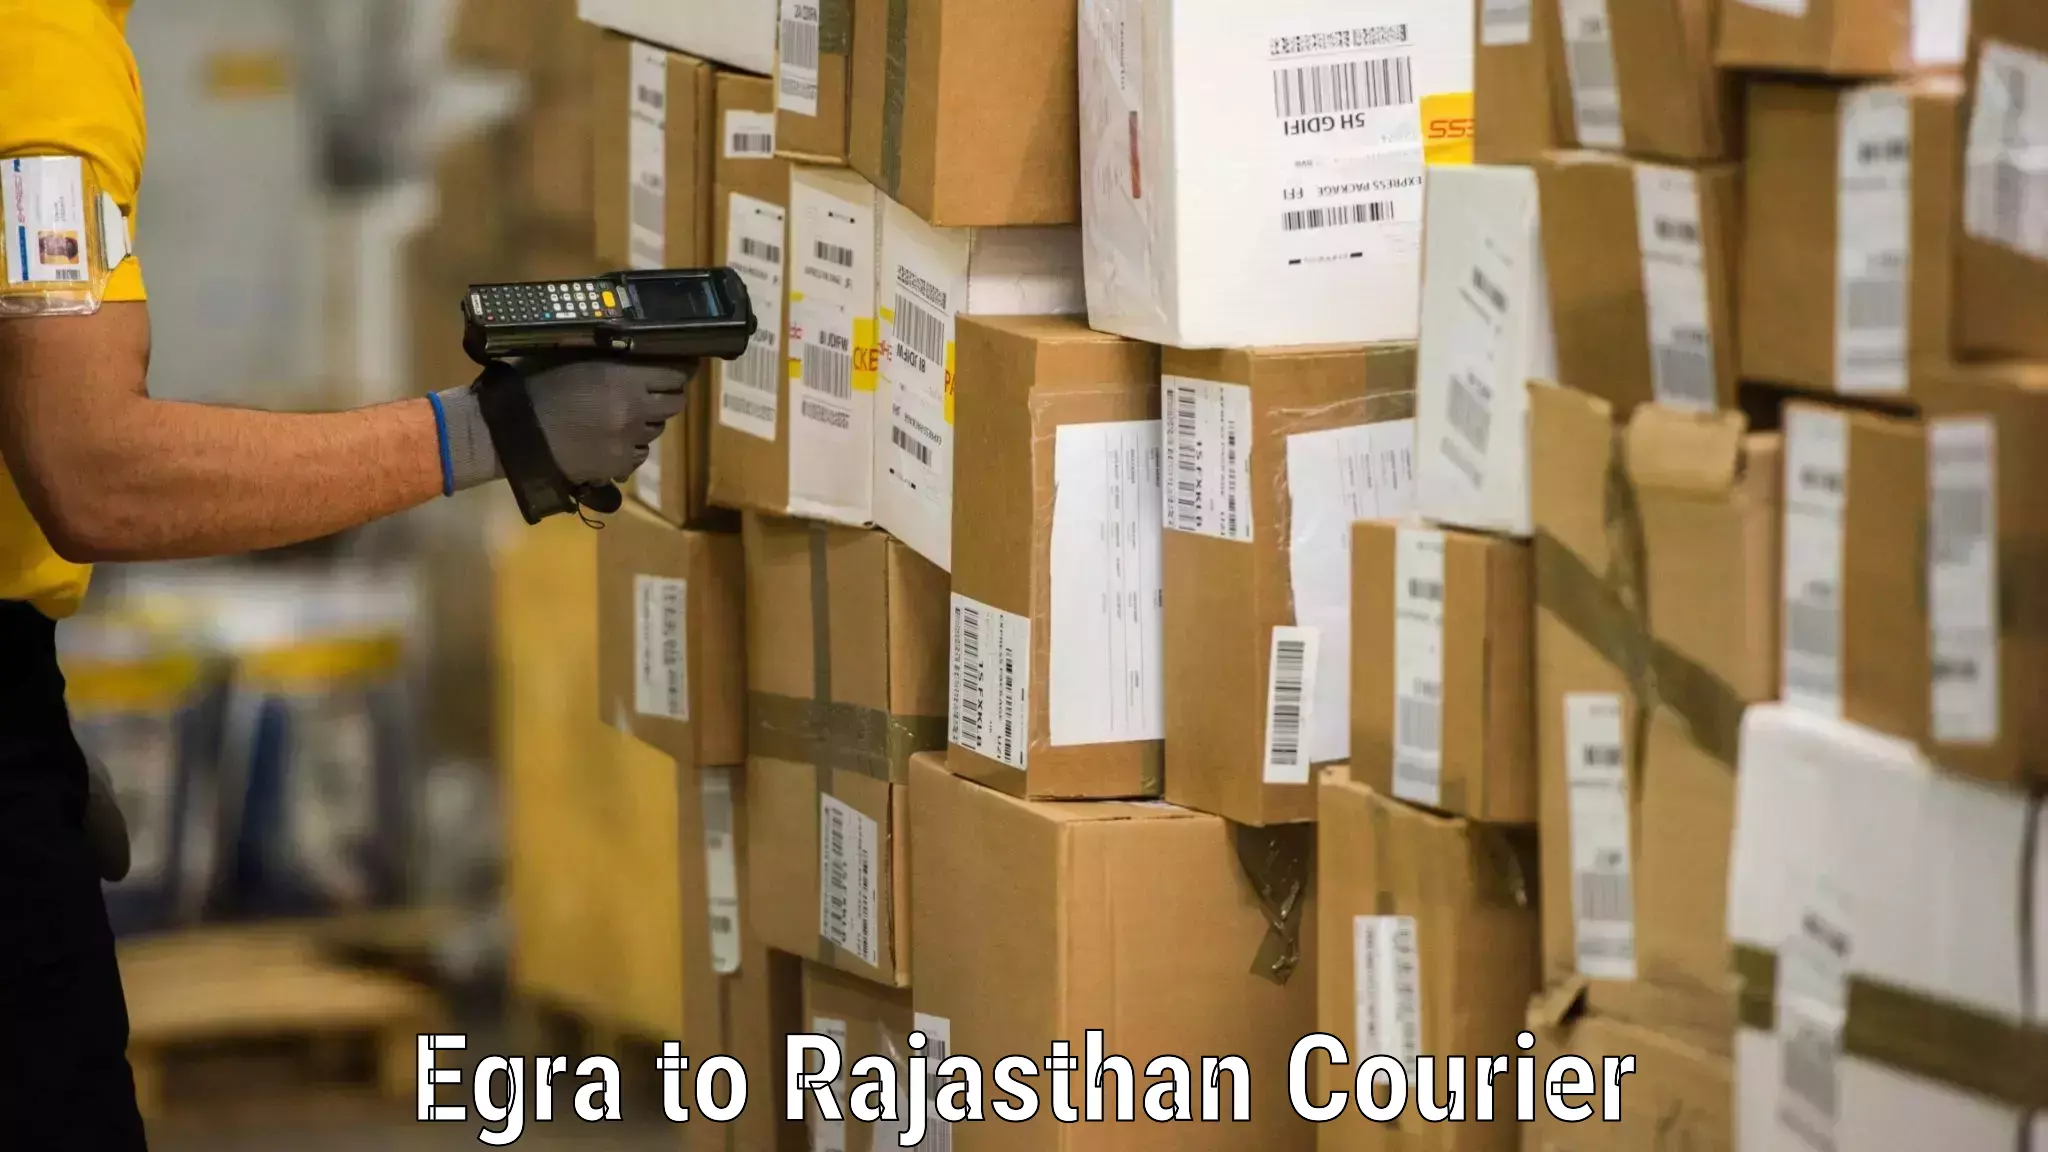 Professional moving company Egra to Rajasthan